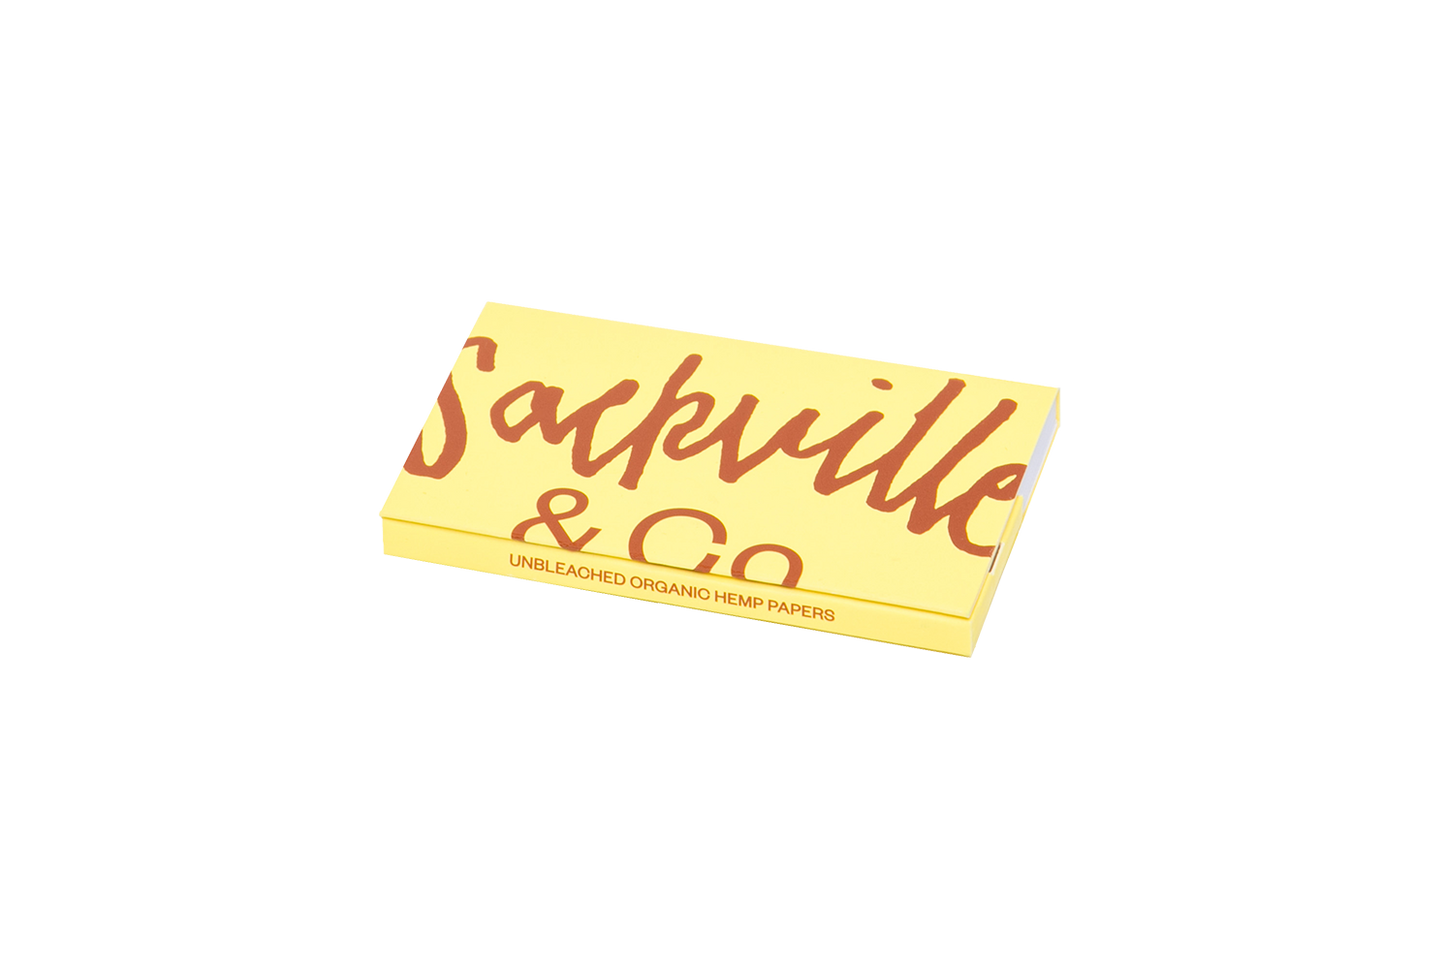 YELLOW ROLLING PAPERS - Sackville & Co.